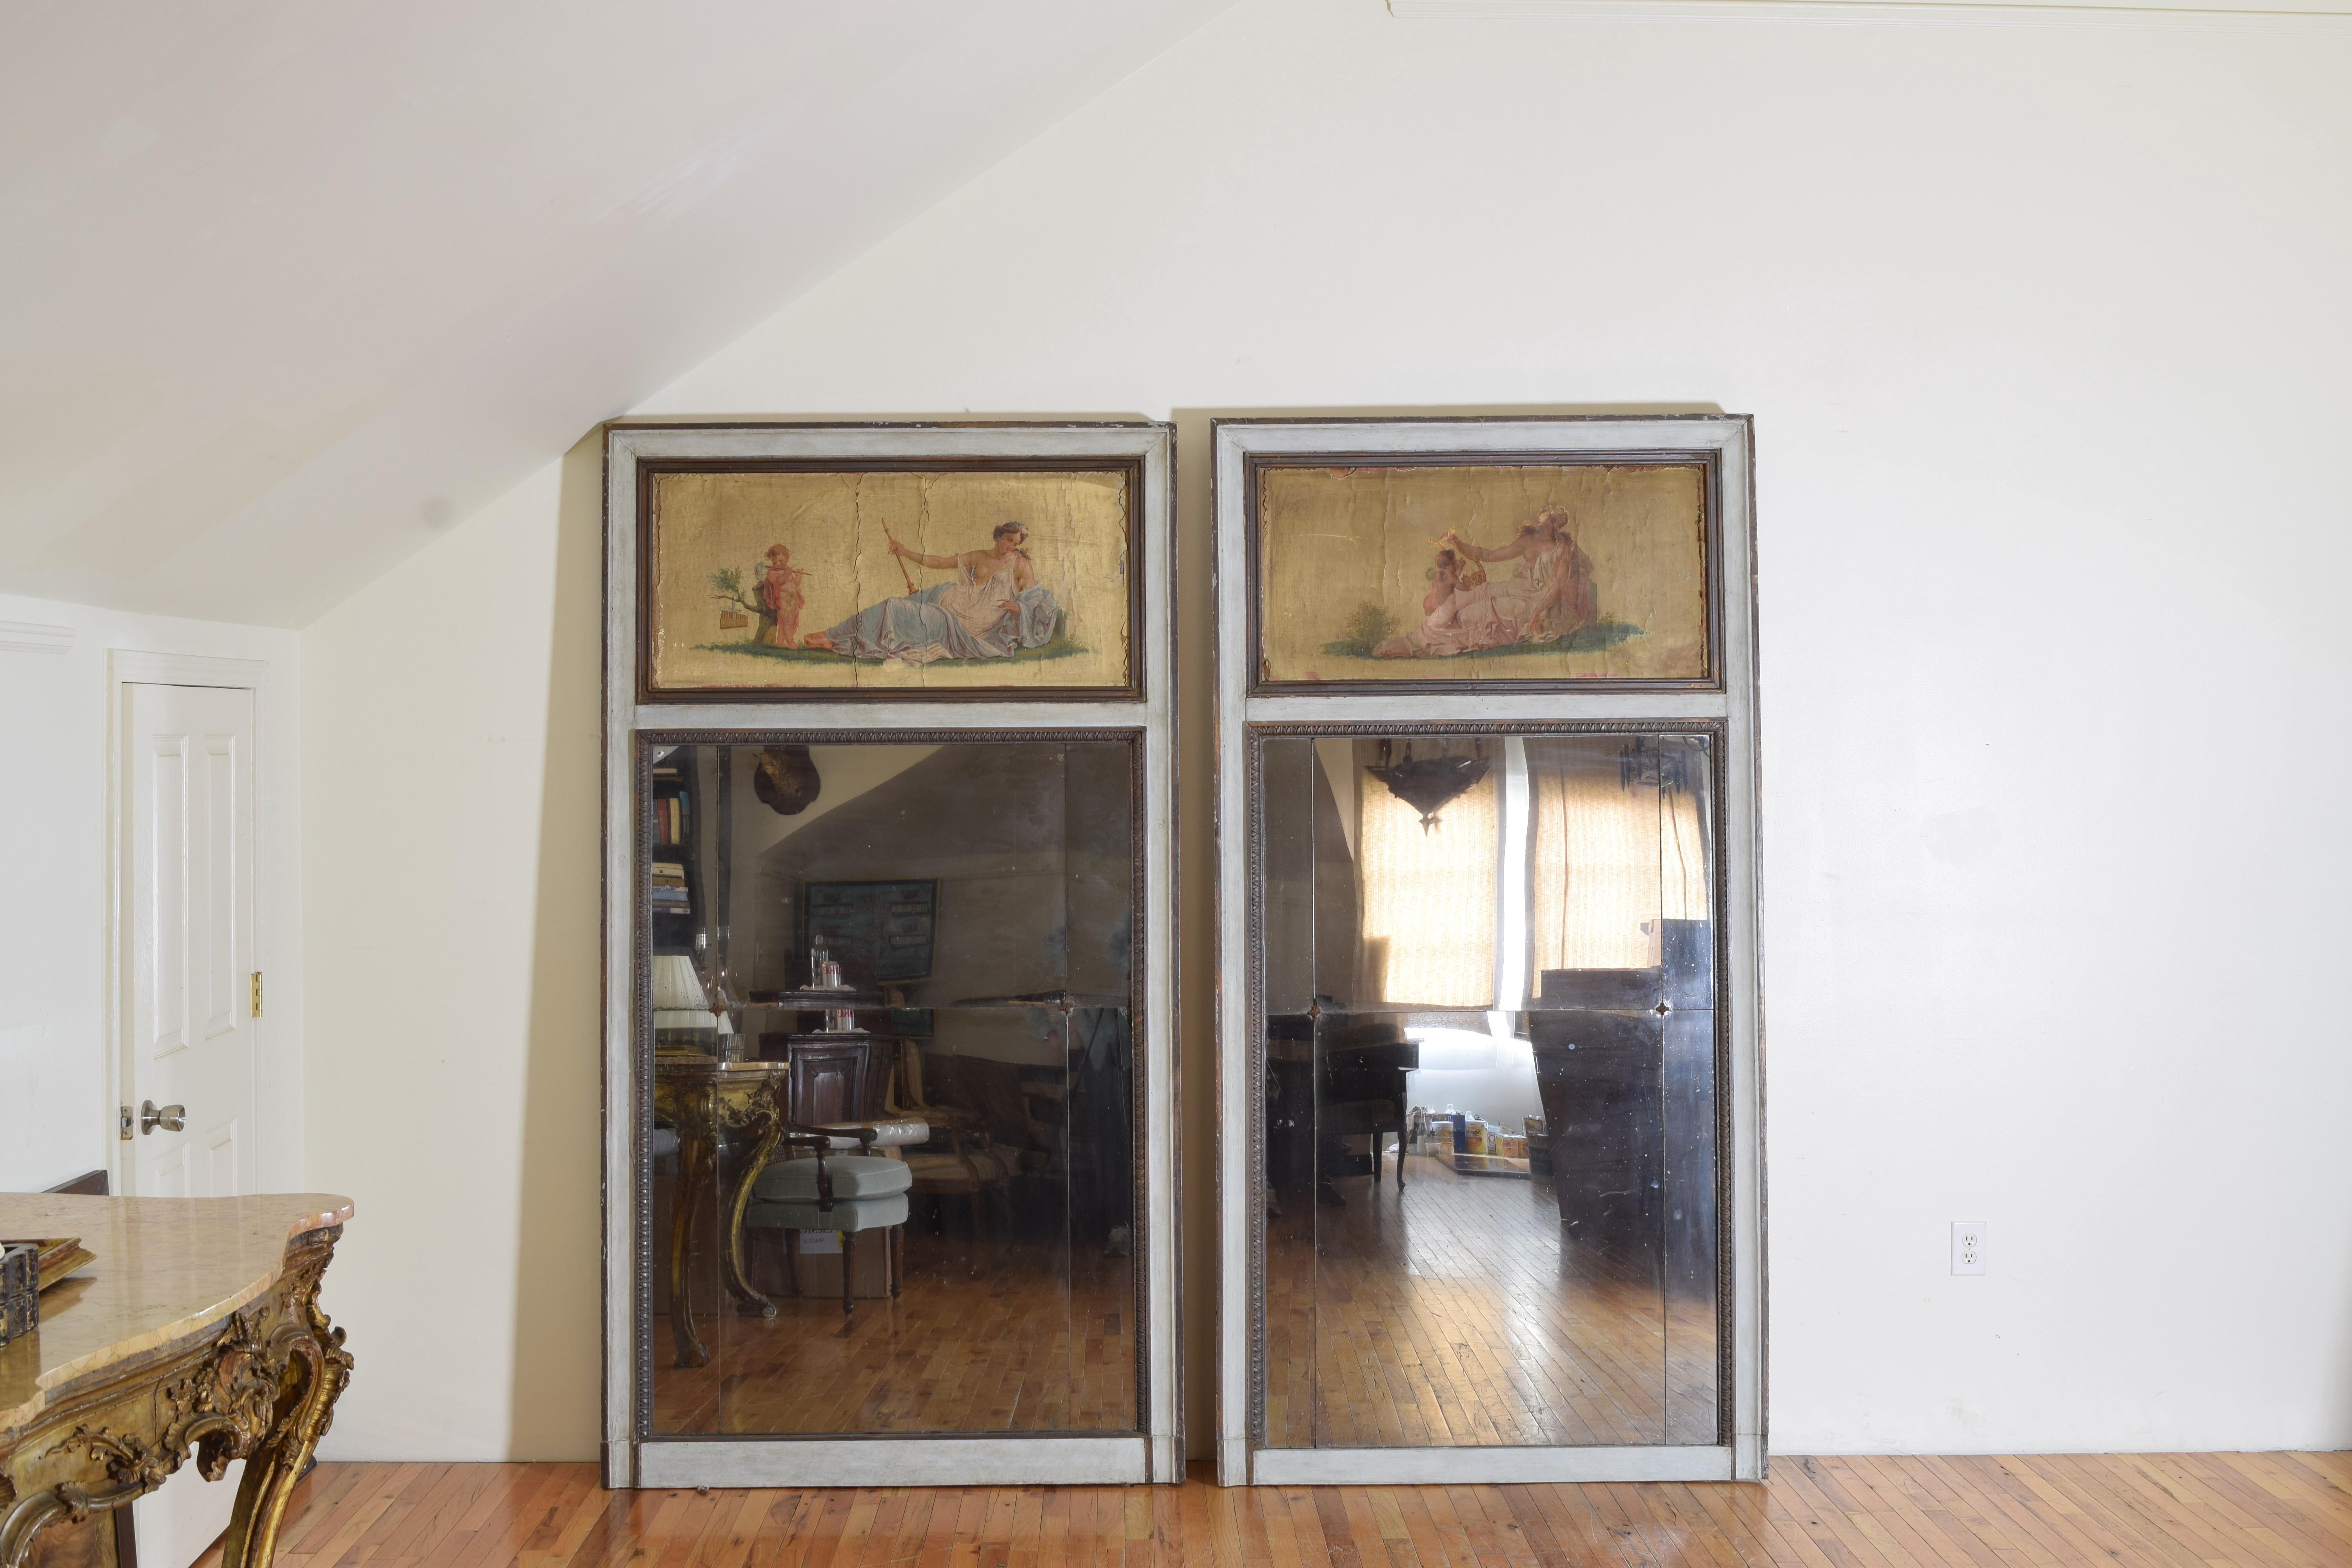 Originally built into the wall, Antique Trumeau mirrors have been the choice of aristocracy for centuries and for top designers in the 21st century as well.  This particular couple were probably once a part of a much larger collection since the